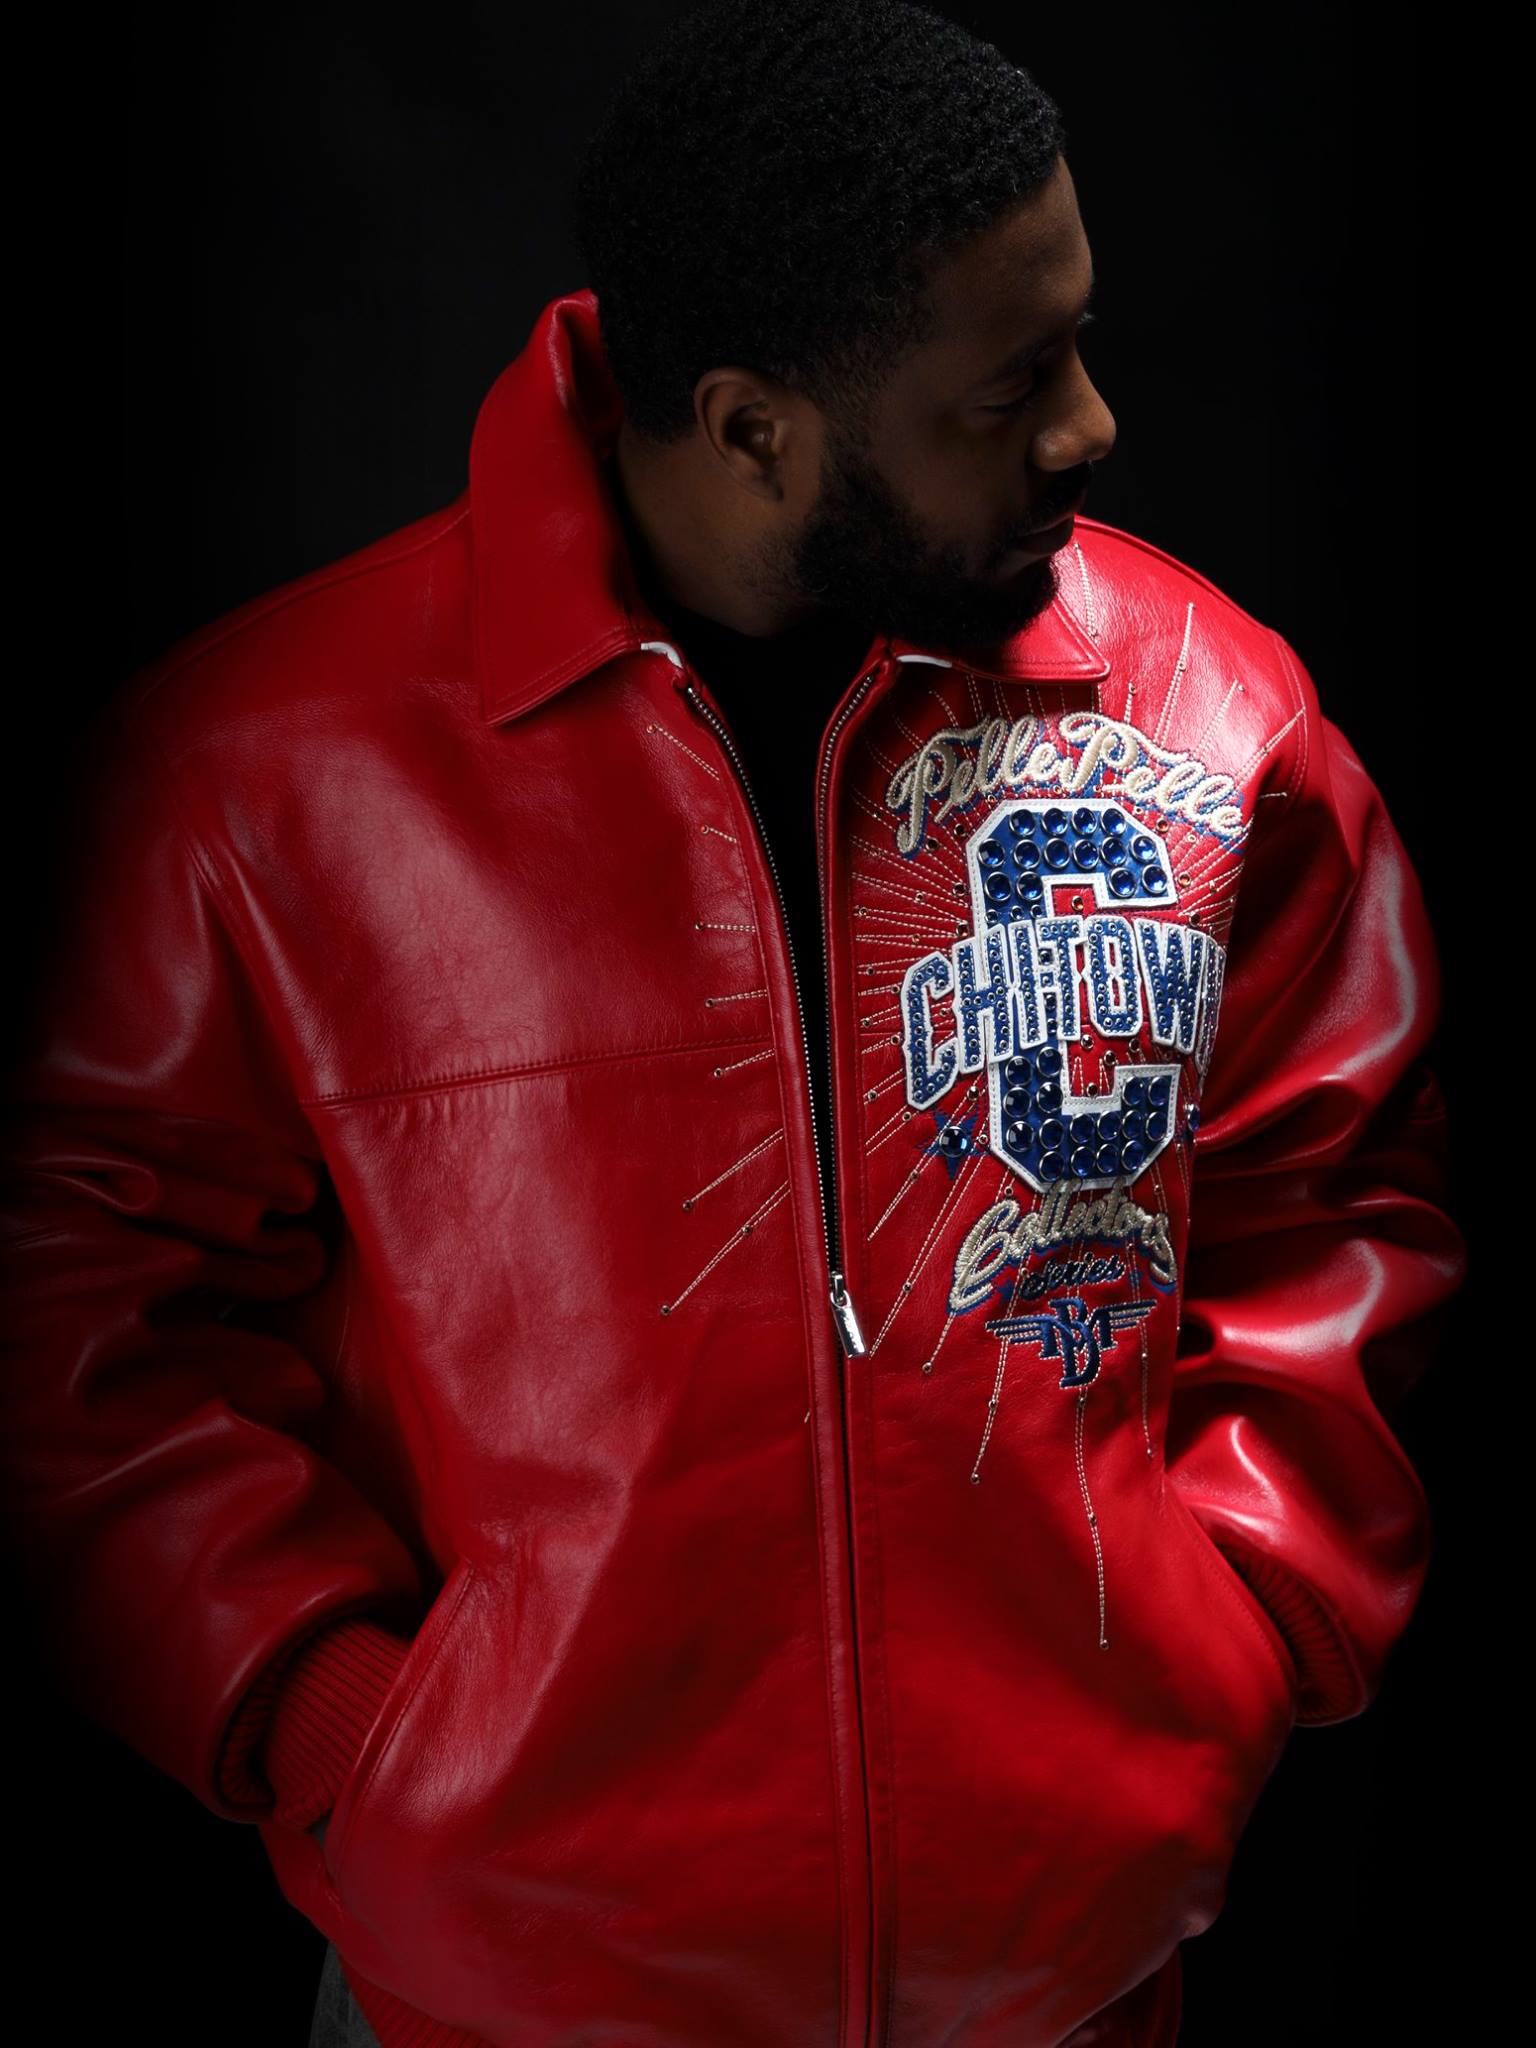 pelle-pelle-chi-town-red-leather-jacket,pelle-pelle-jacket,pelle-pelle-store,pelle-pelle-leather-jacket,pelle-pelle,red-leather-jacket,red-jacket